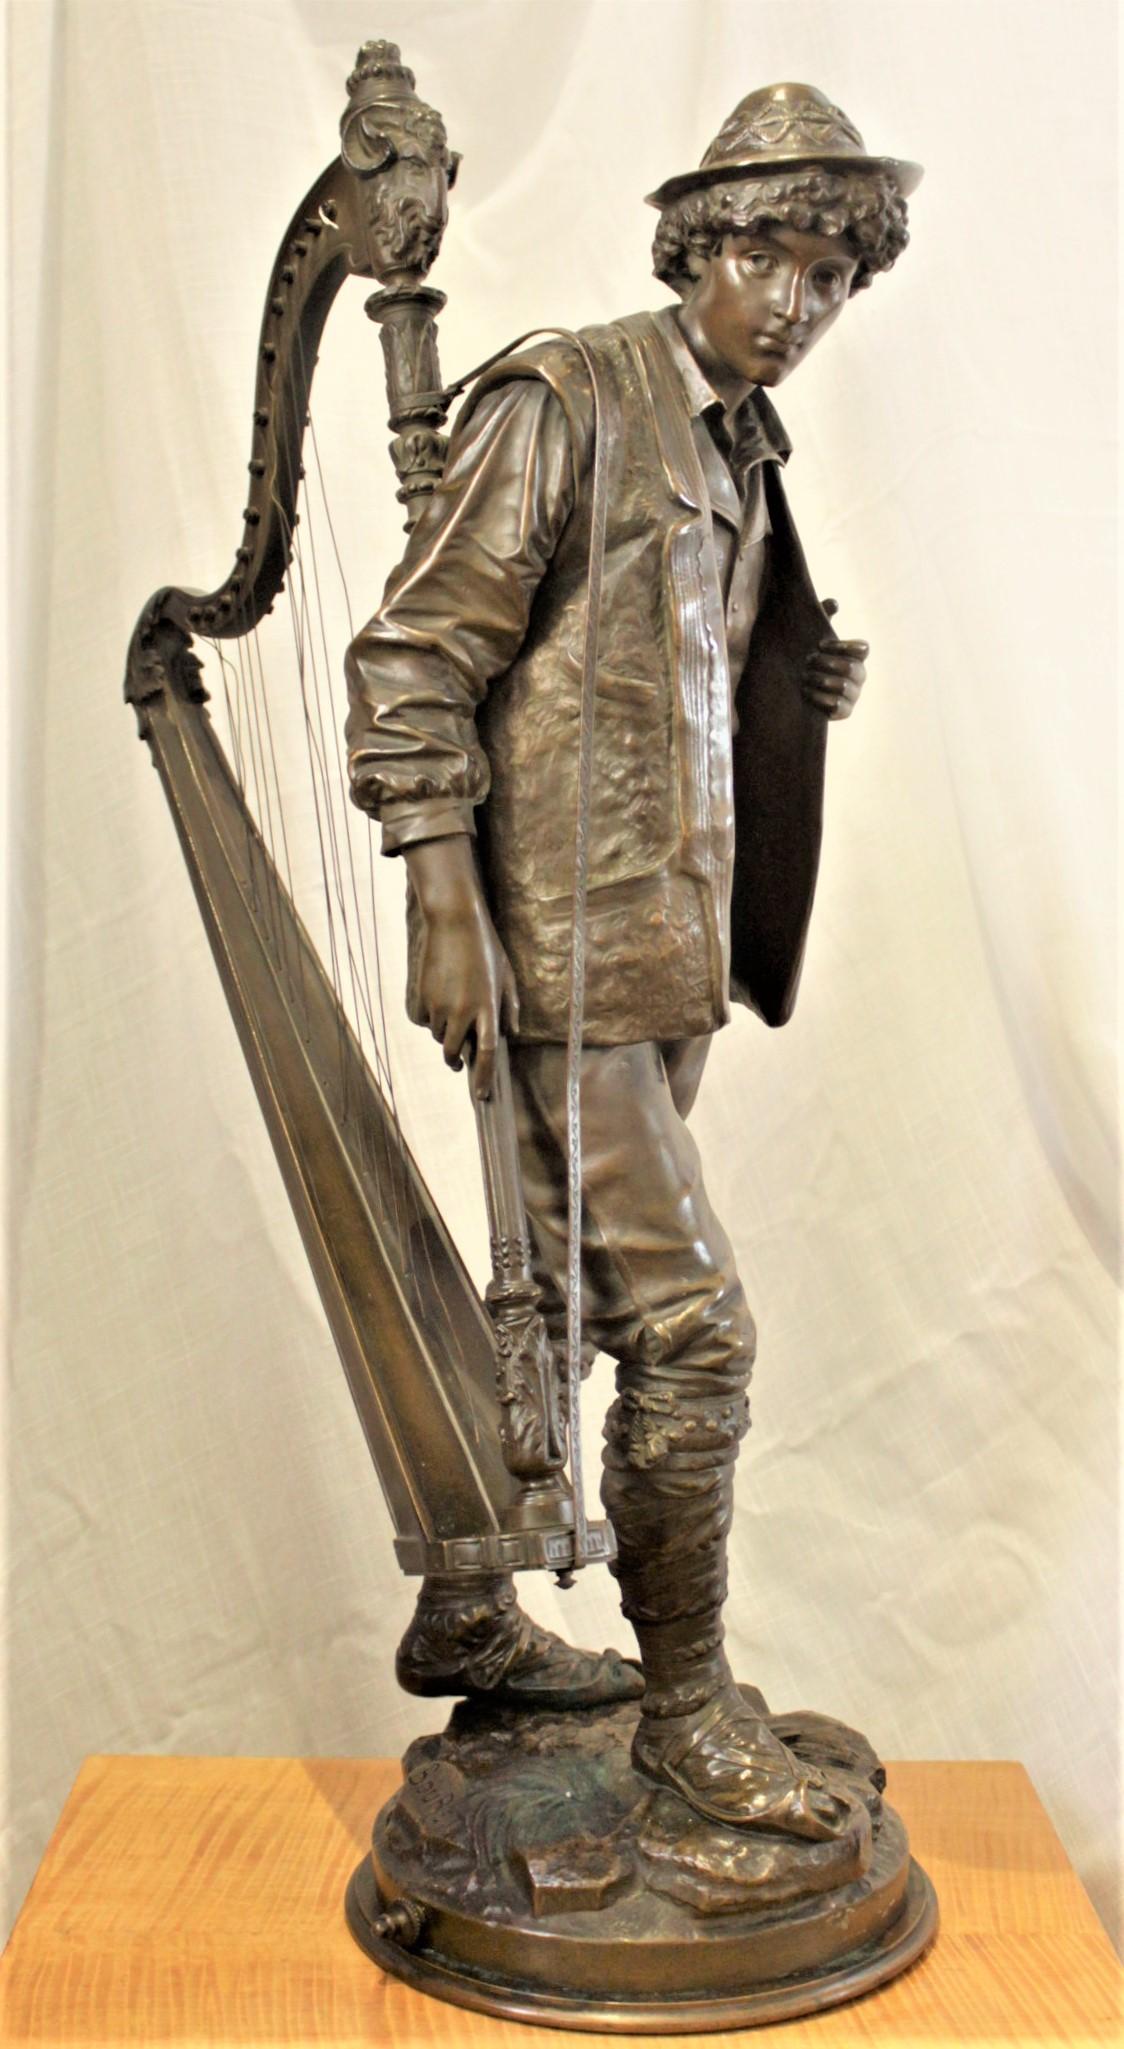 This large and detailed bronze sculpture was done by the French artist Eutrope Bouret in approximately 1880 in the period Romantic style. The sculpture depicts a young male carrying a harp. The sculpture is clearly signed 